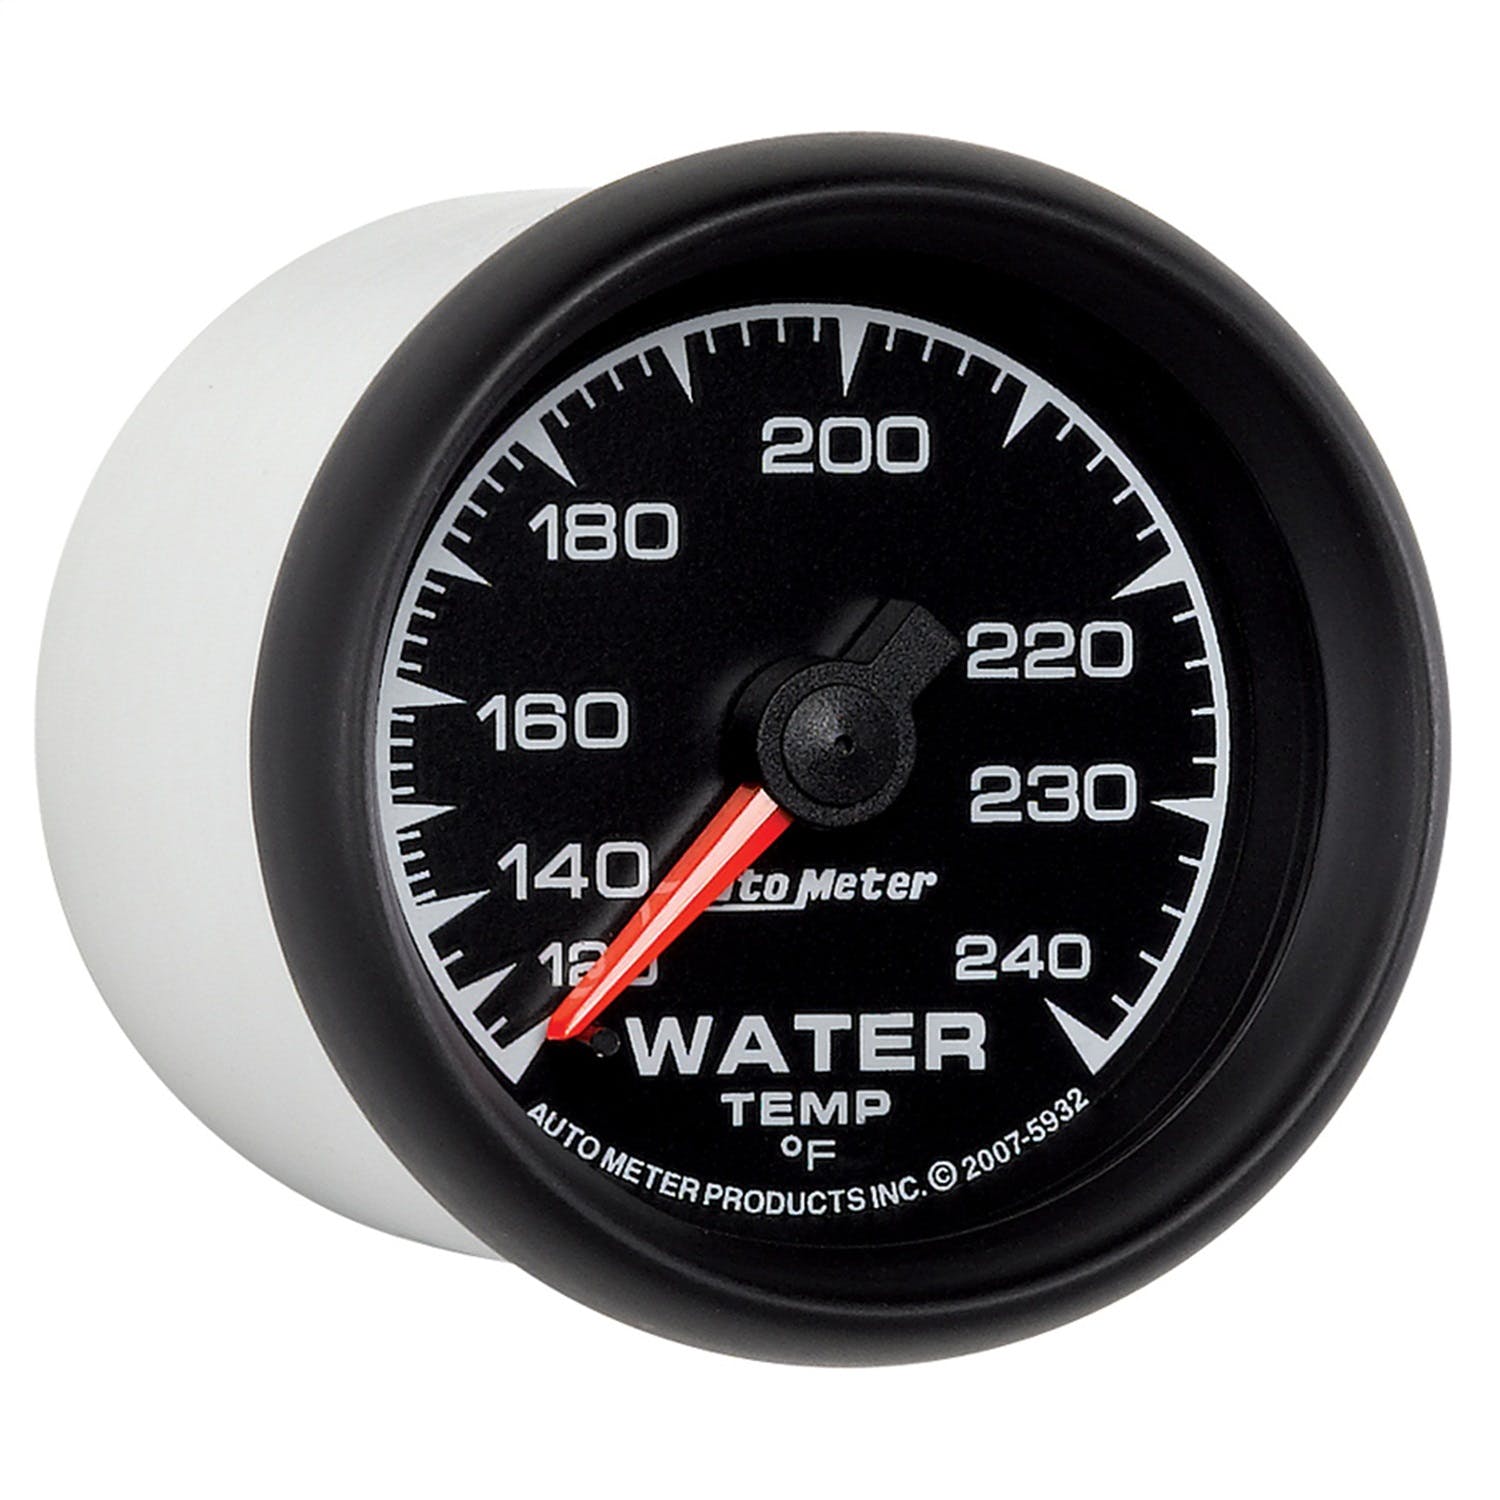 AutoMeter Products 5932 2-1/16in Water Temp 120- 240 F Mechanical